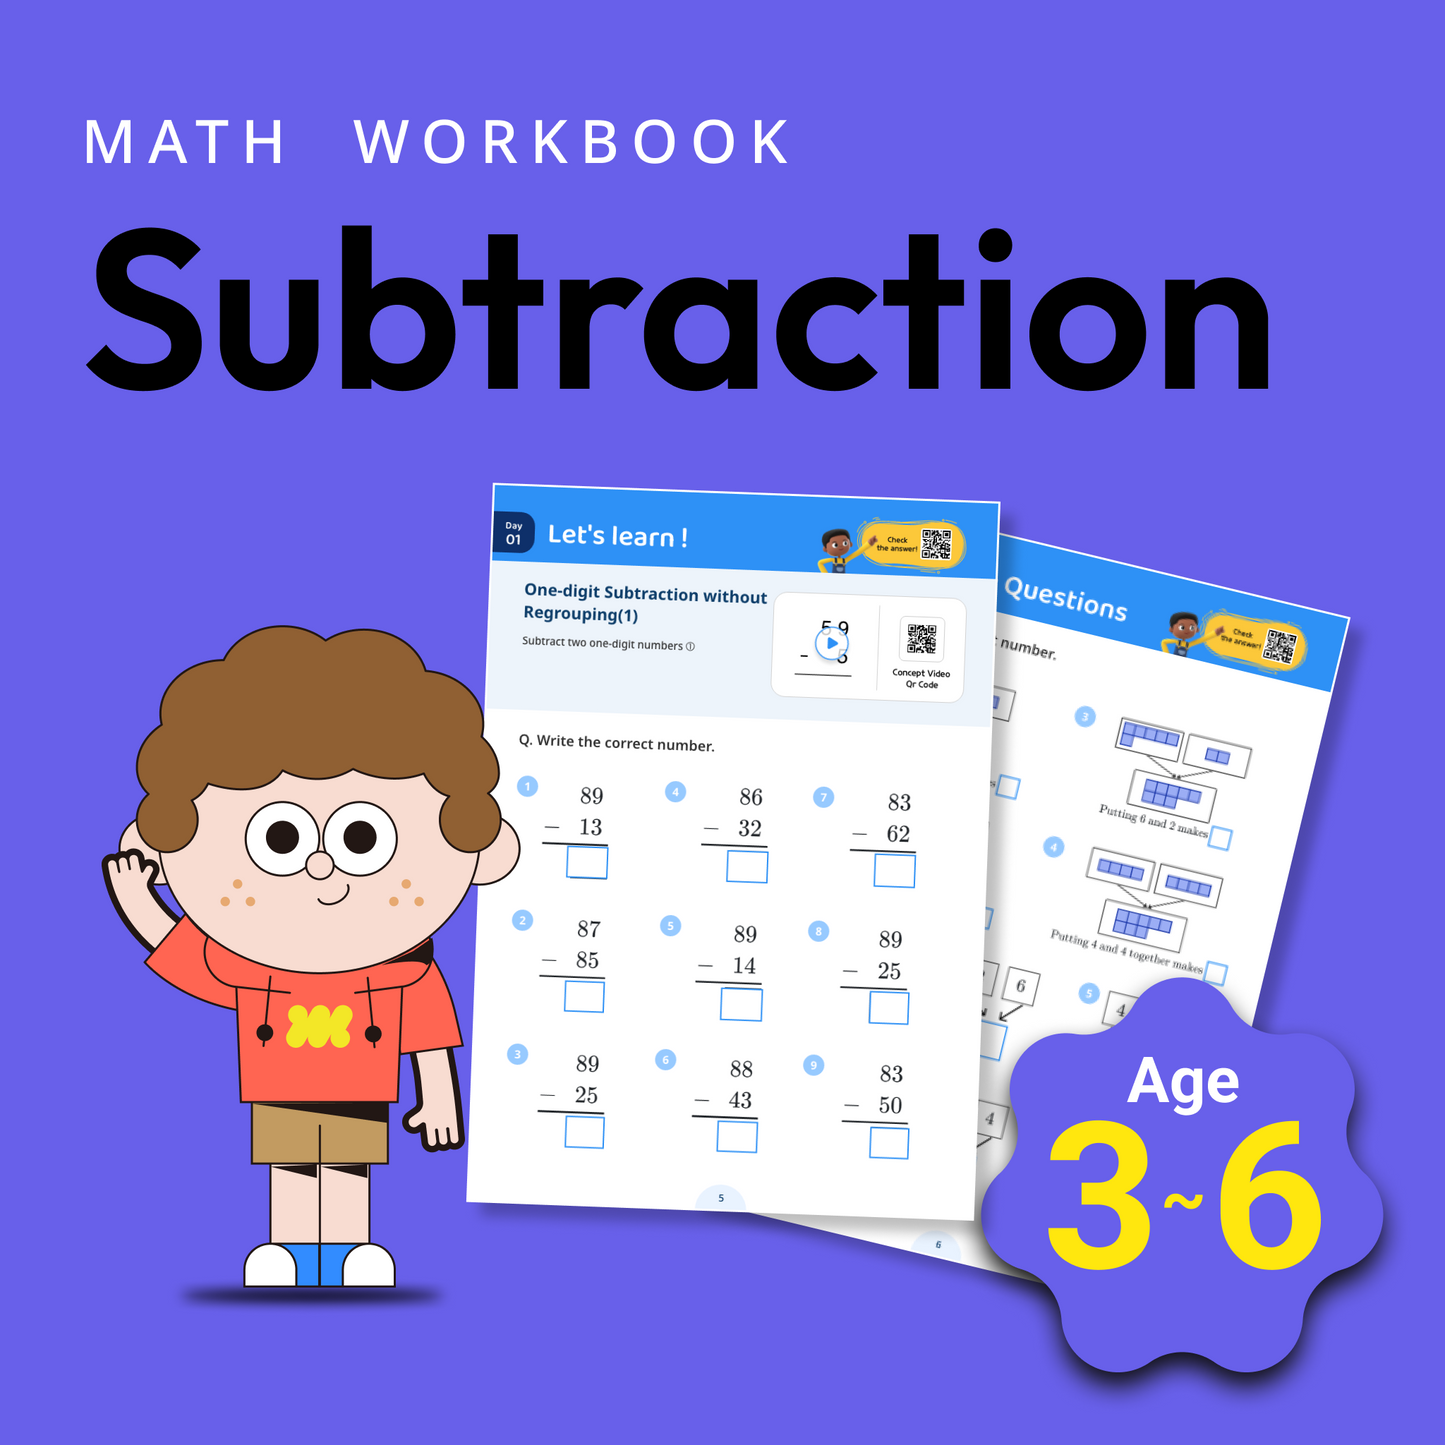 Subtract_two_one-digit_numbers2